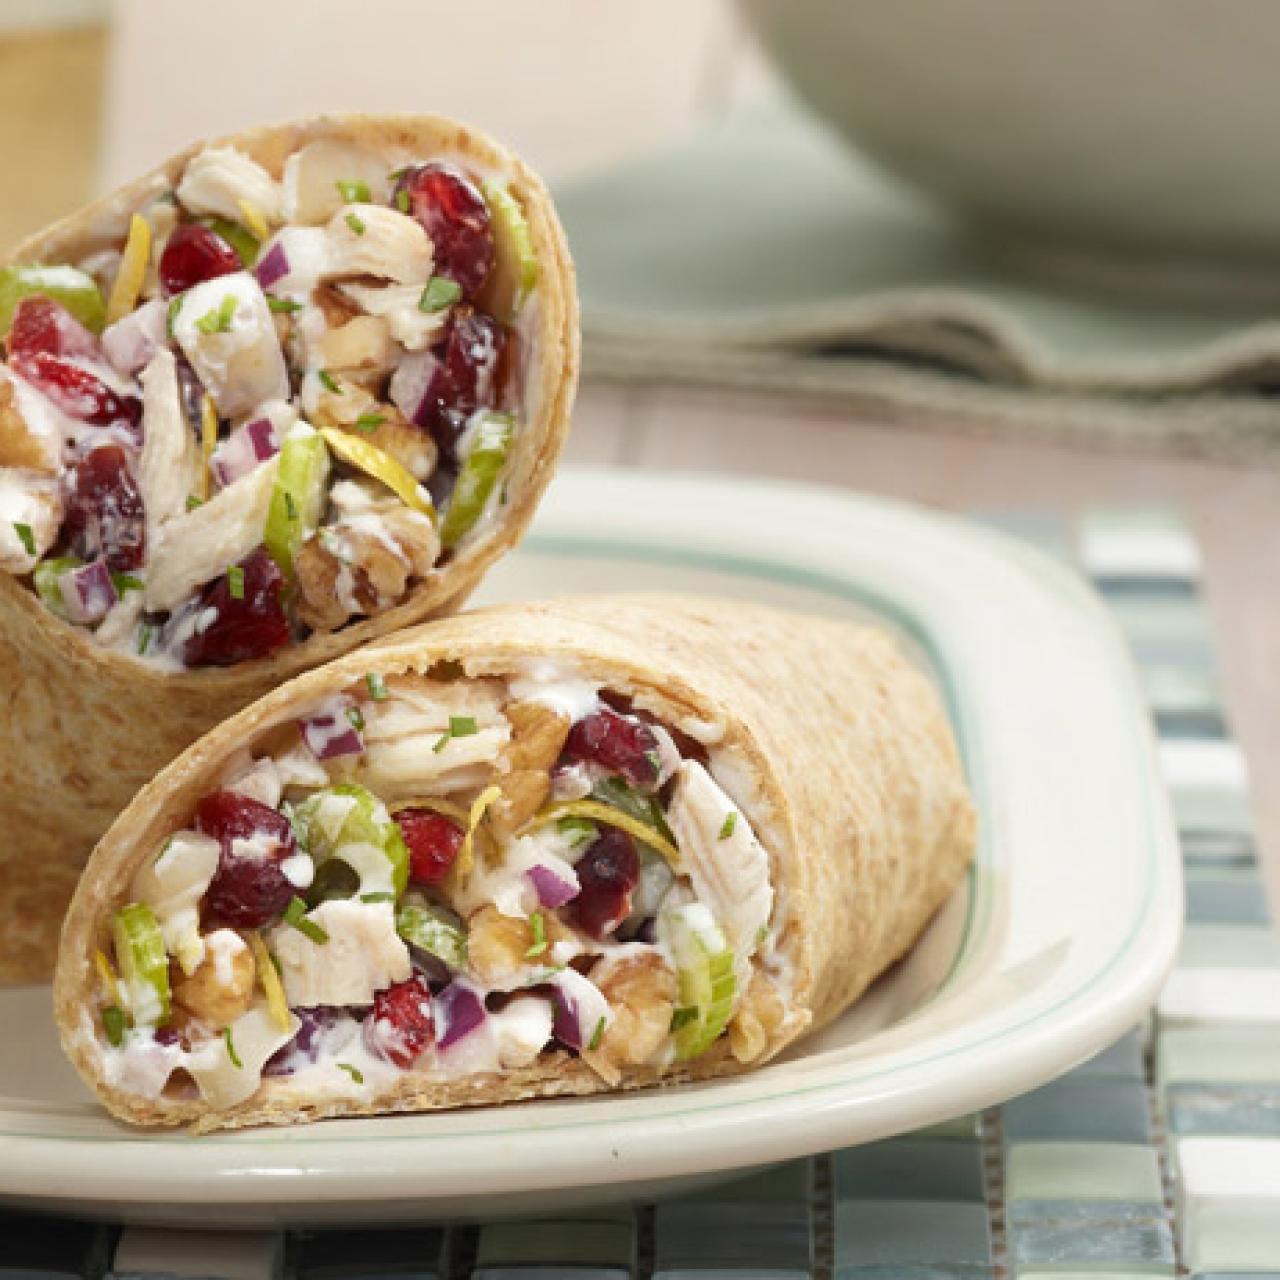 Healthy Lunch Wraps Recipe - Love and Lemons